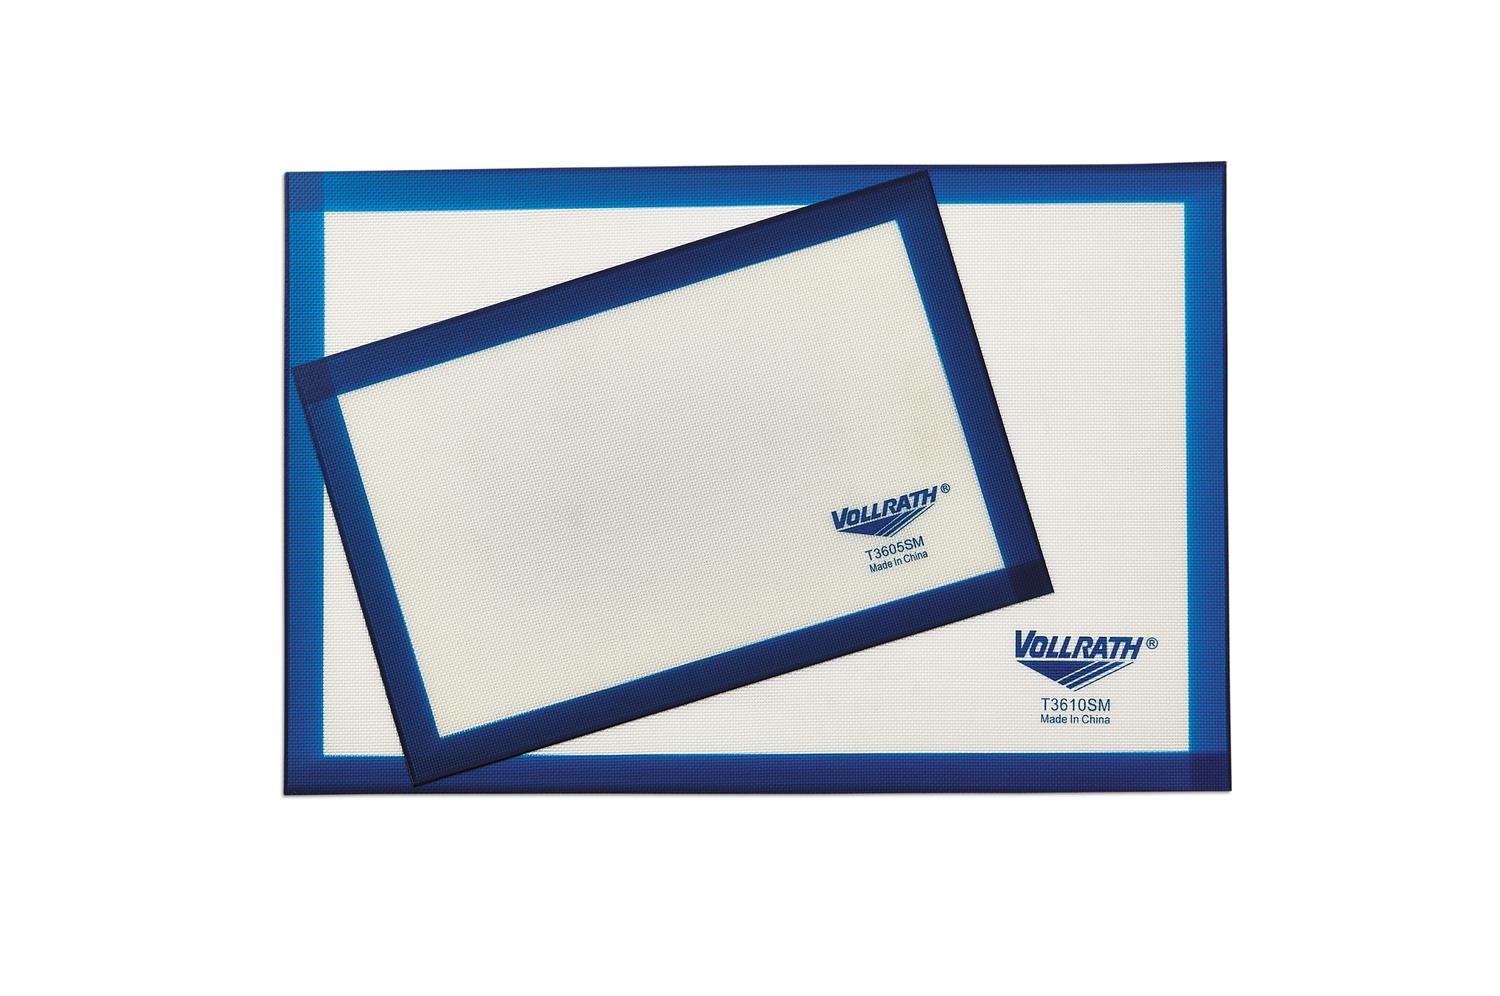 Vollrath T3610SM Silicone Baking Mat - Fits Full Size Sheet Pan